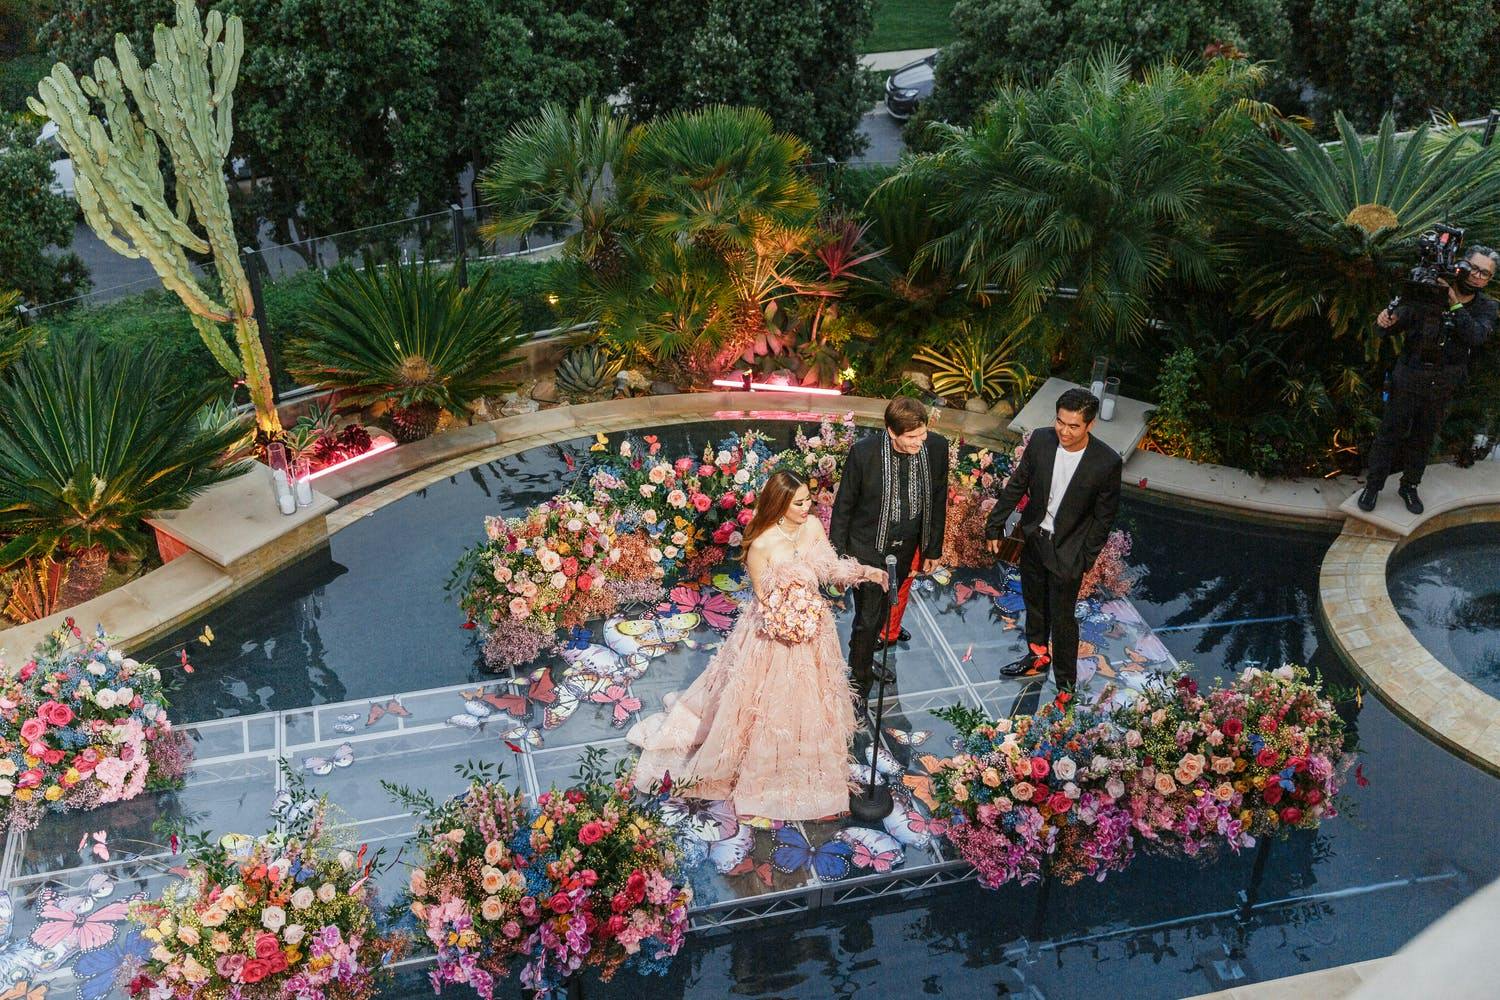 Anniversary Party Ideas: Couple renews vows on floating wedding aisle lined with bright and colorful flowers | PartySlate